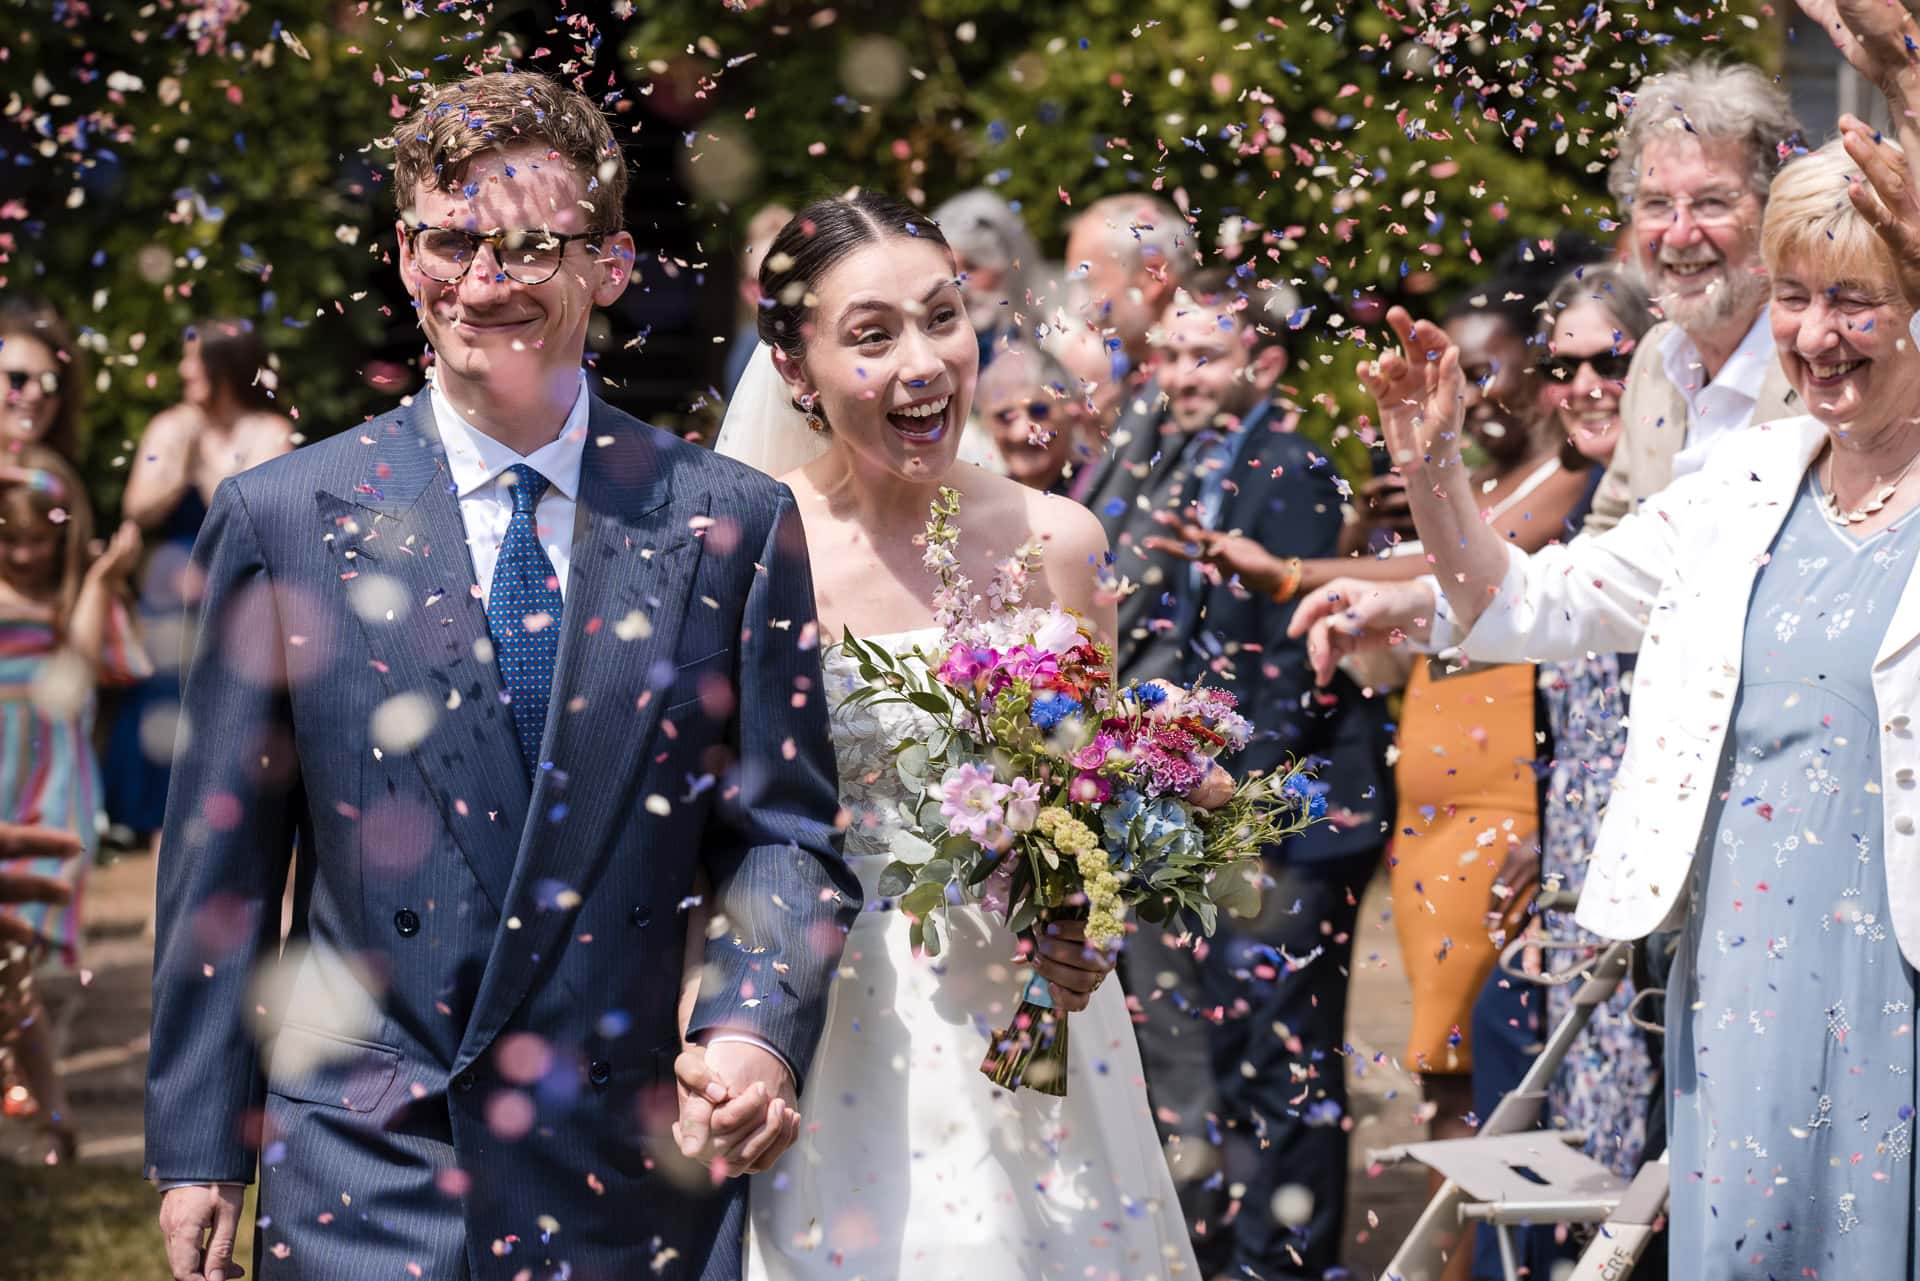 Confetti covering the bride and groom during a Pembroke College wedding